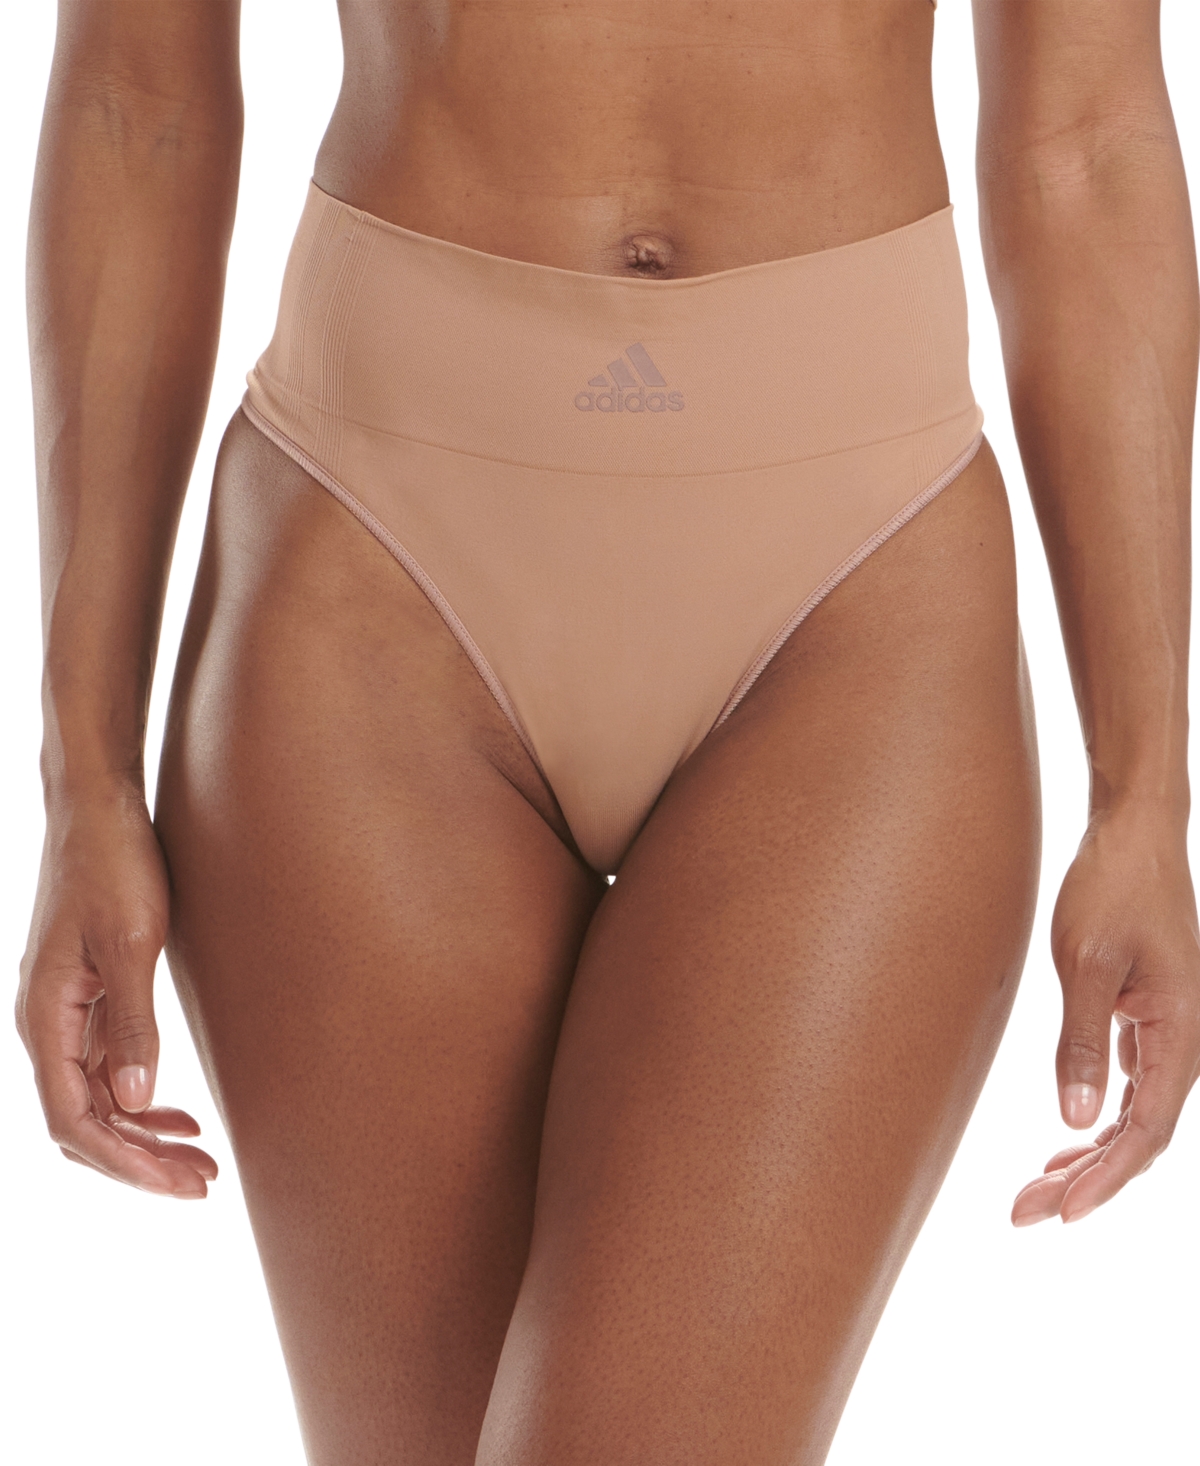 adidas Intimates Women's 720 Degree Stretch Thong Underwear 4A1H01 -  Toasted Almond